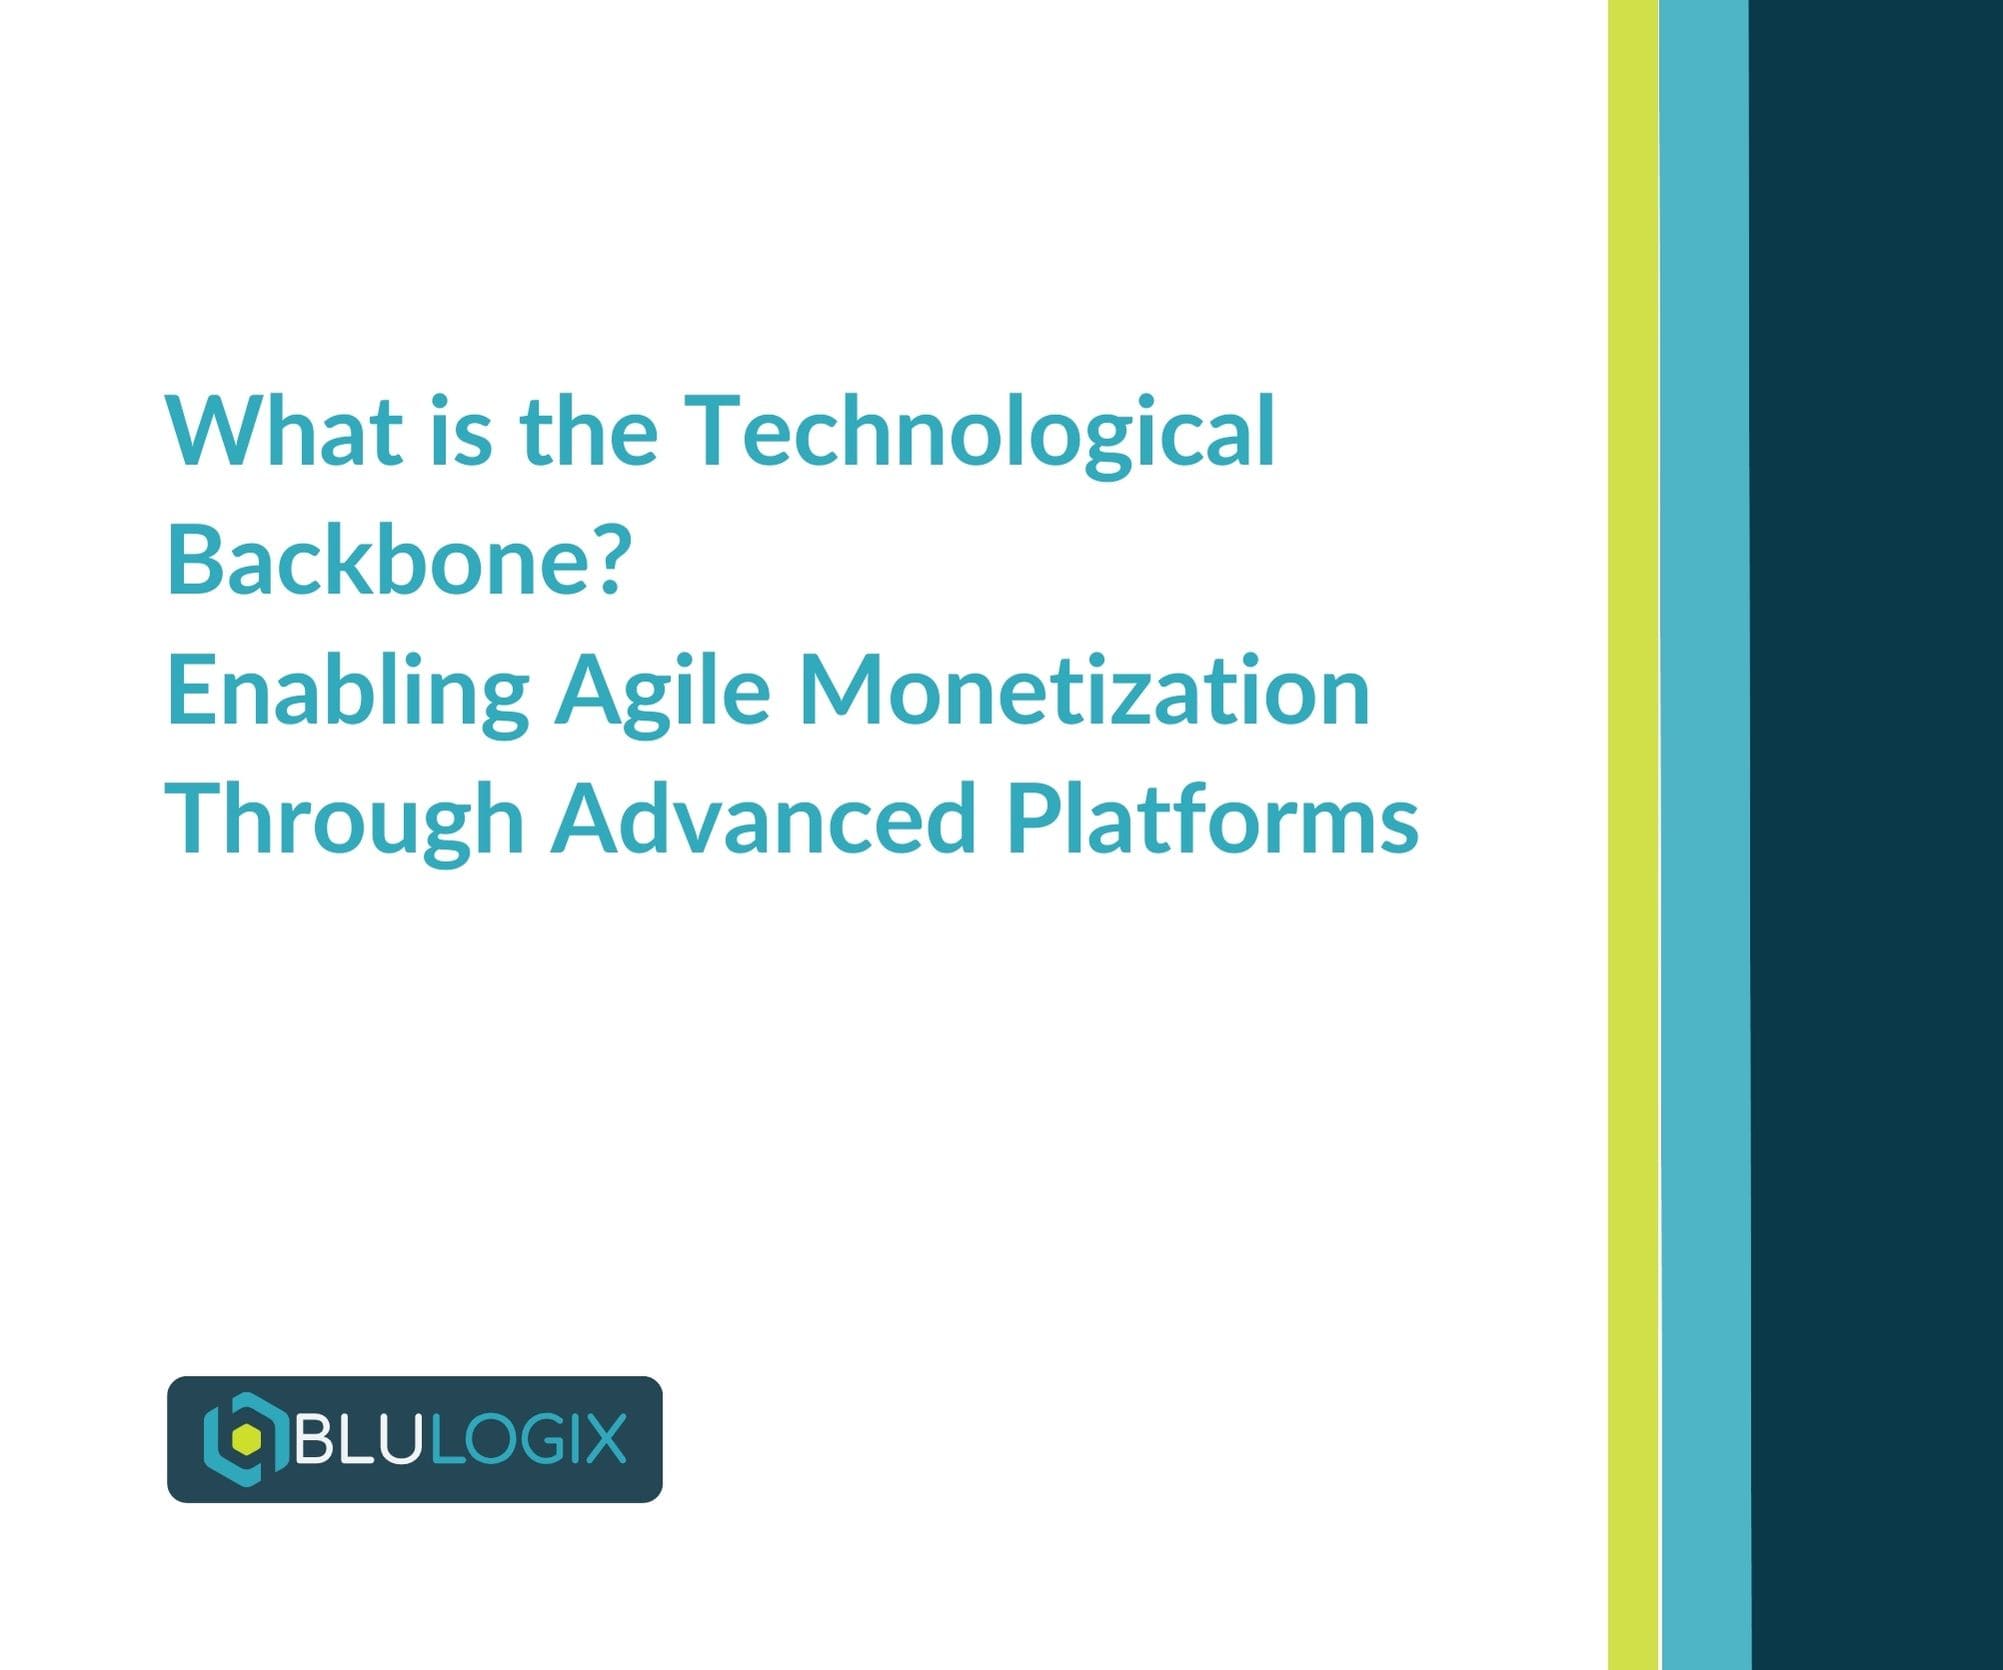 What is the Technological Backbone